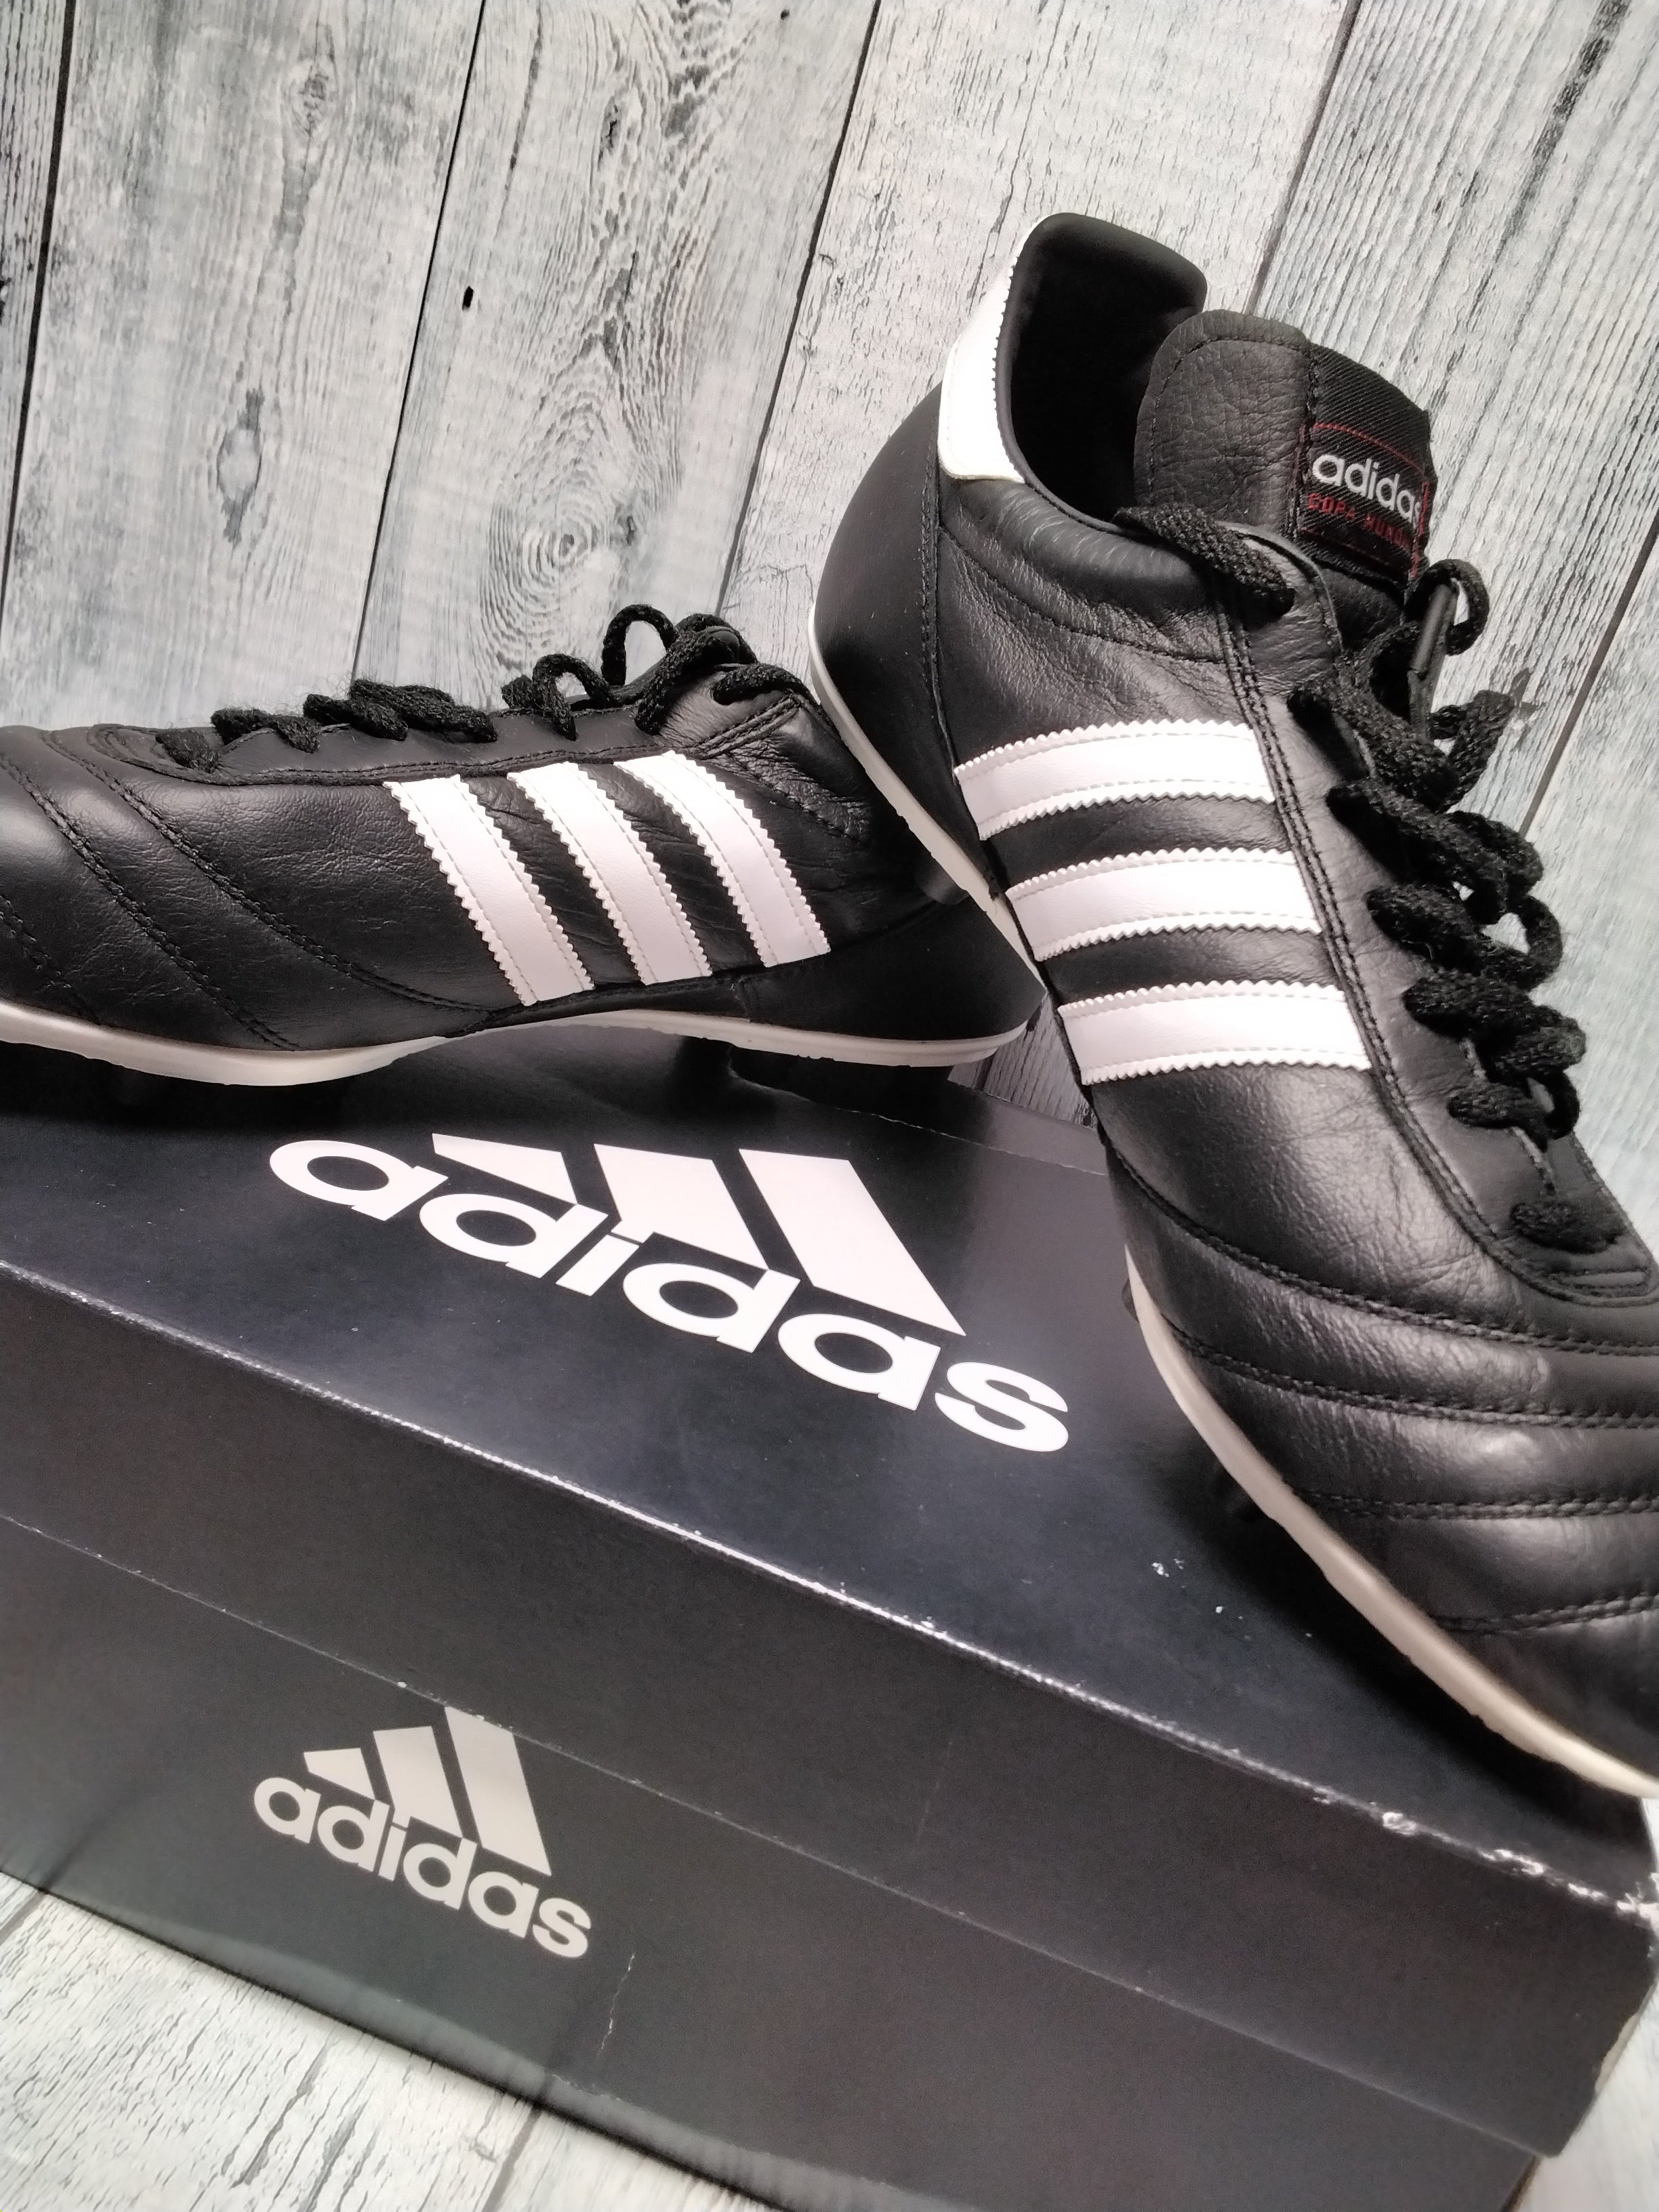 adidas Men's Copa Mundial Soccer Shoe, Size 11.5 *GREAT CONDITION* (7836370796782)